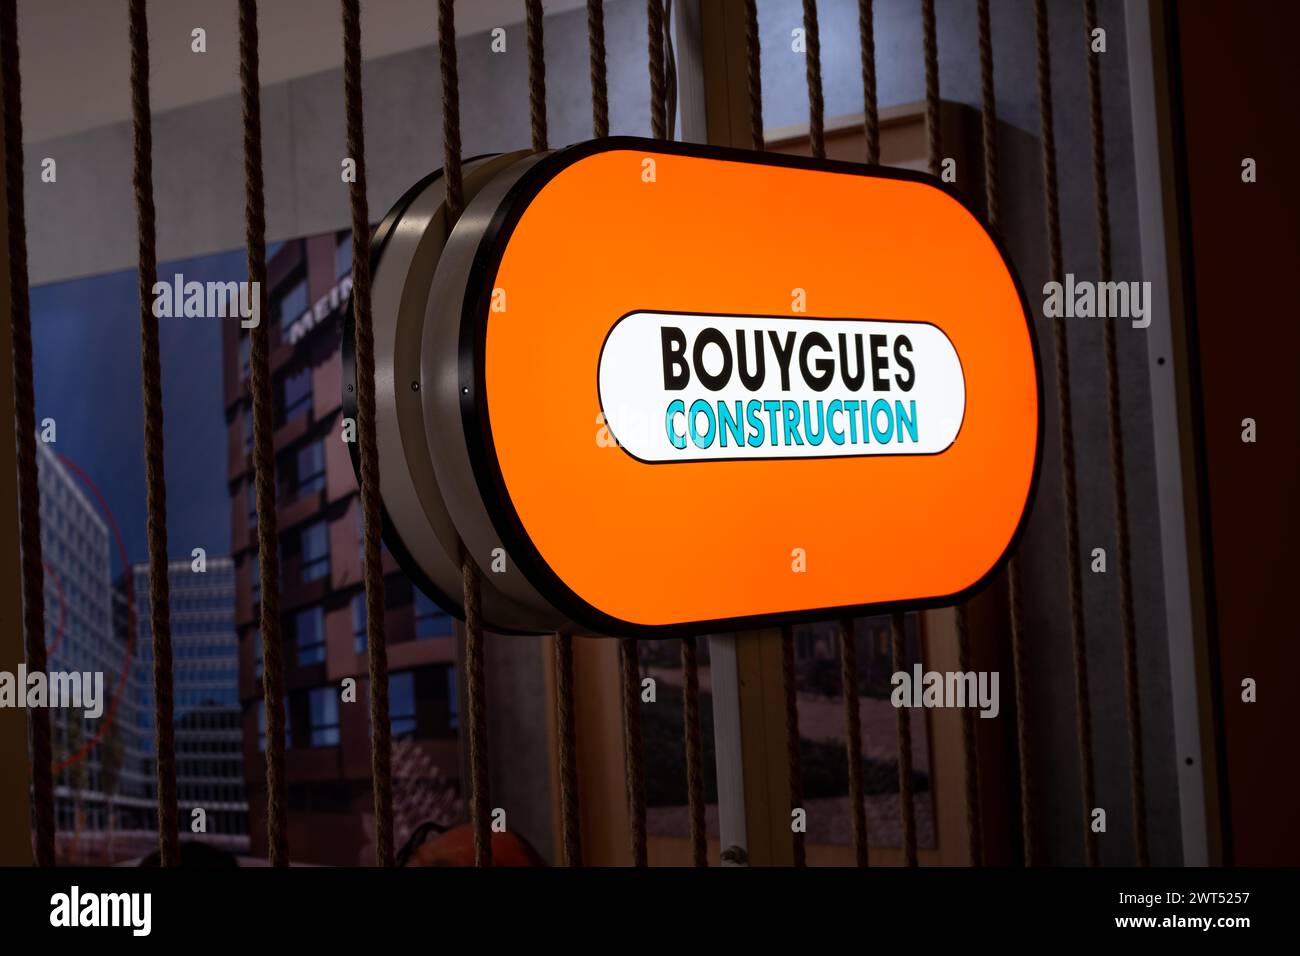 View of the Bouygues Construction logo at Mipim in Cannes. The MIPIM Fair in Cannes is the biggest annual international exhibition dedicated to real estate and investment in innovative and ecological architectural projects. Stock Photo